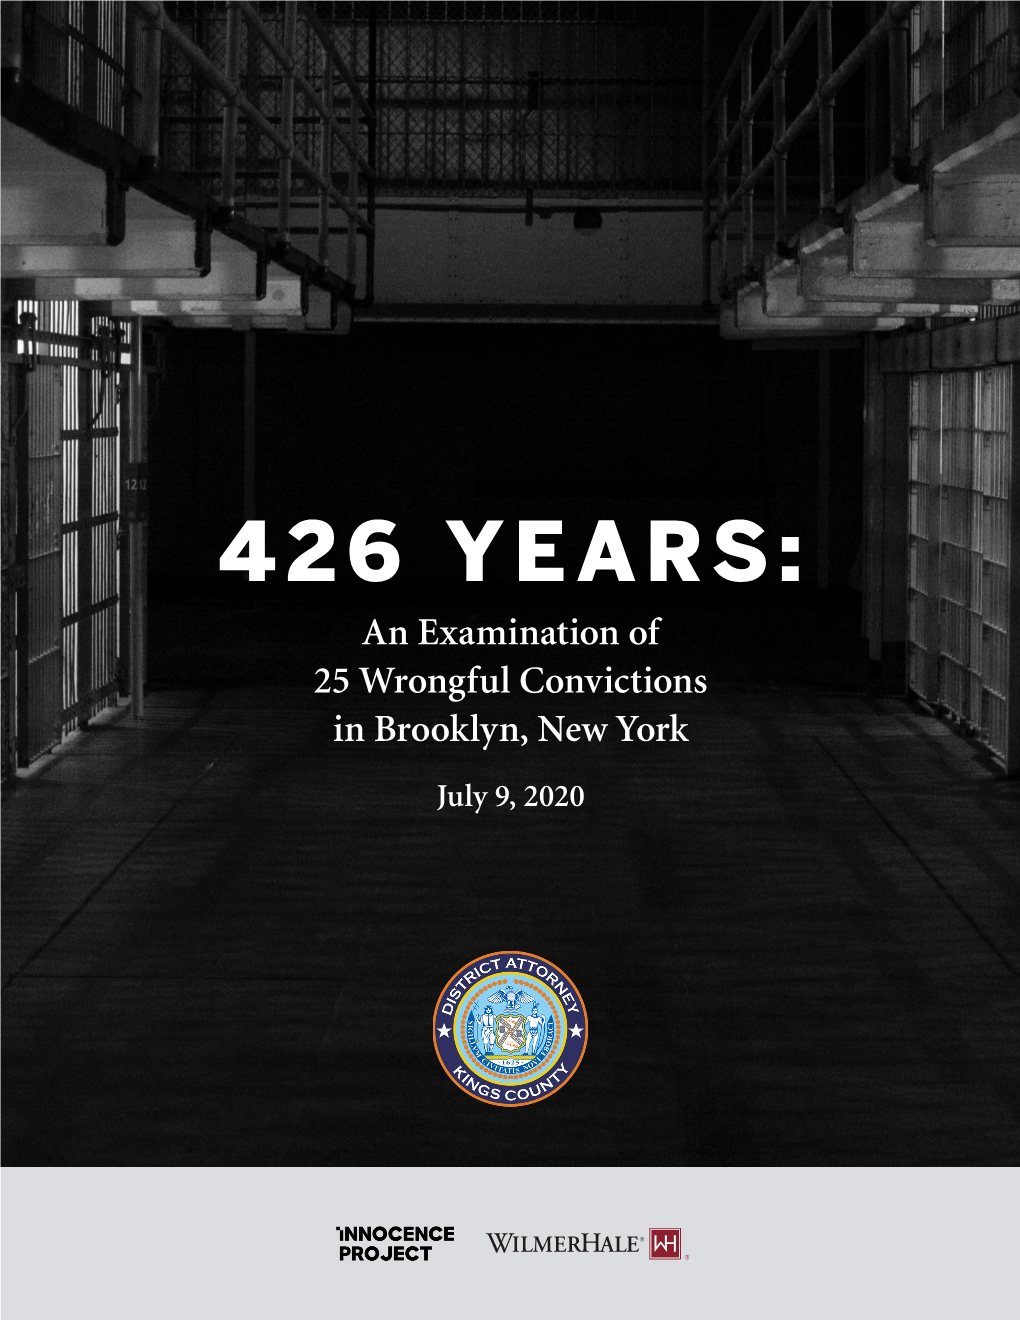 426 YEARS: an Examination of 25 Wrongful Convictions in Brooklyn, New York July 9, 2020 July 9, 2020